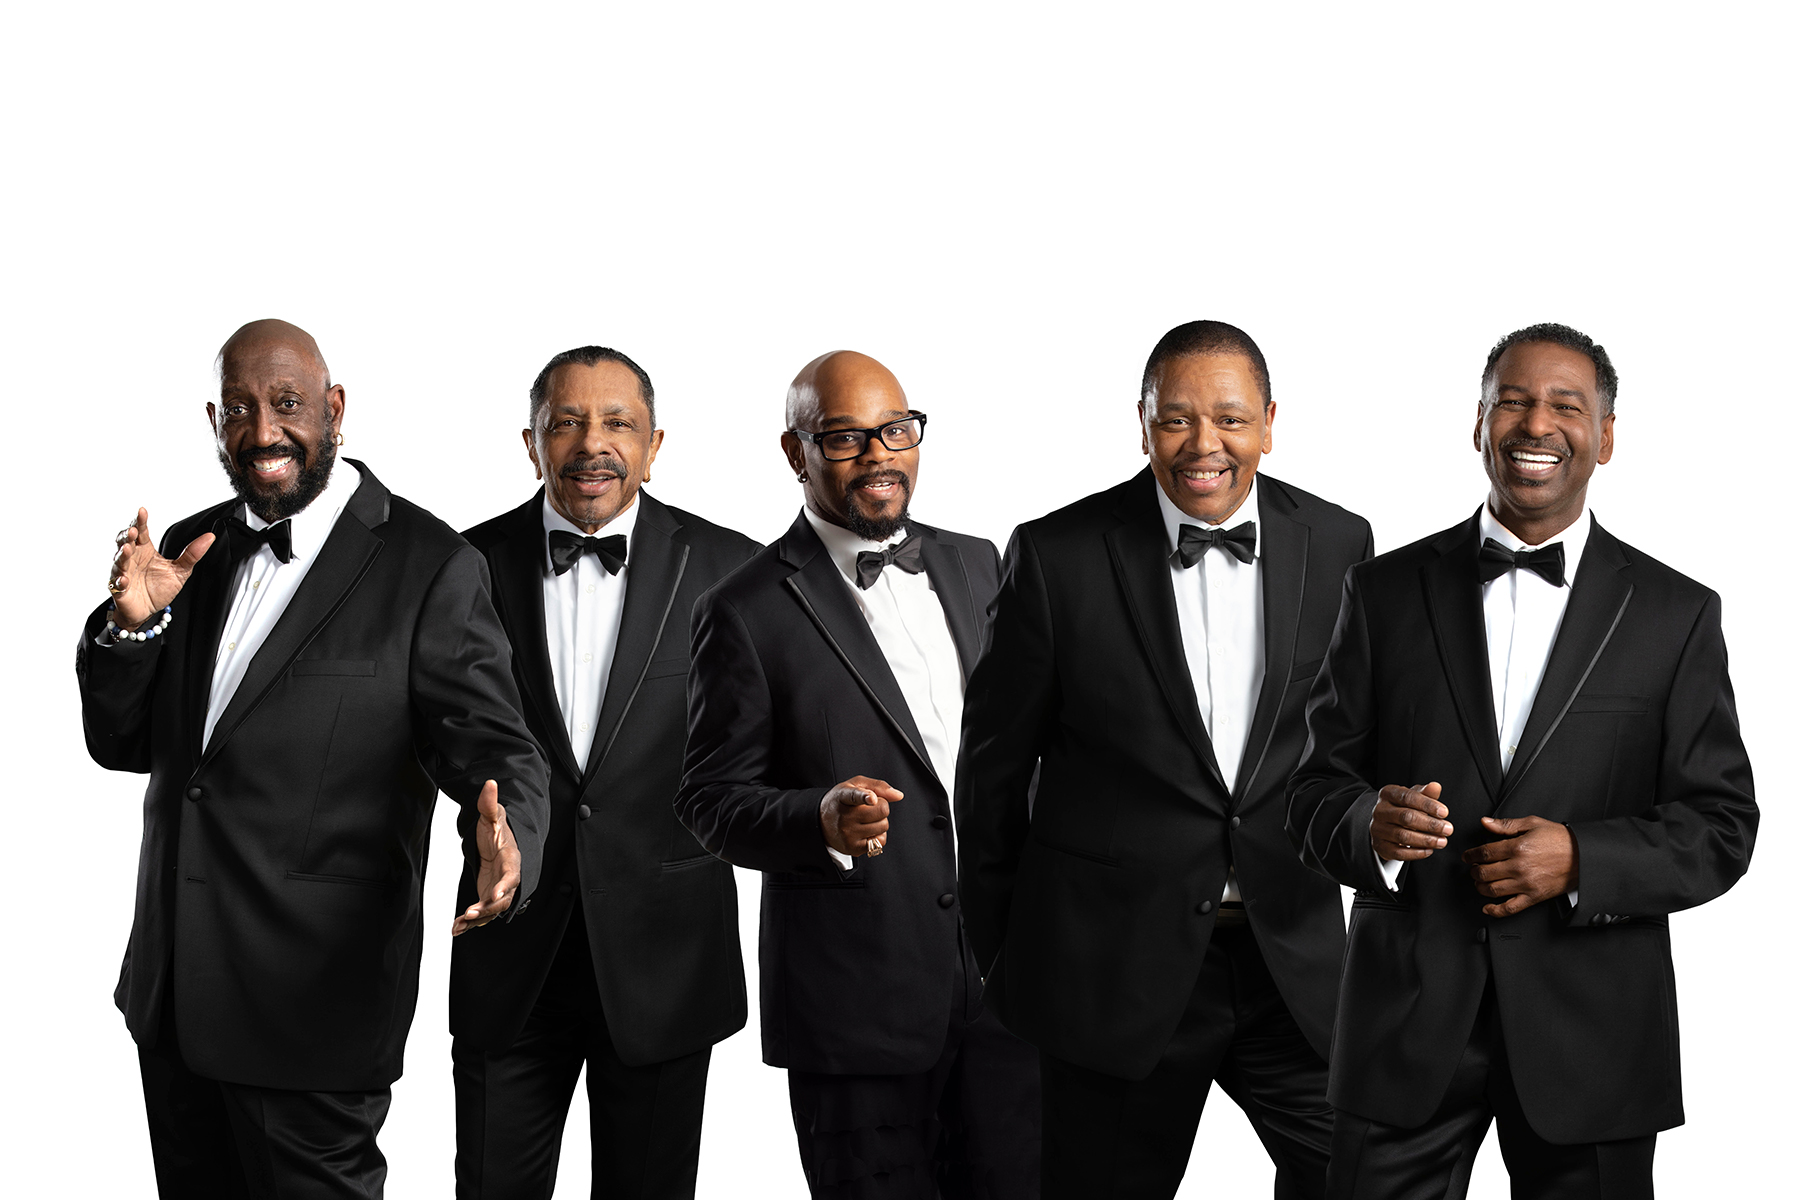 The Temptations Mark 60th Anniversary with Smokey Robinson-Penned Song